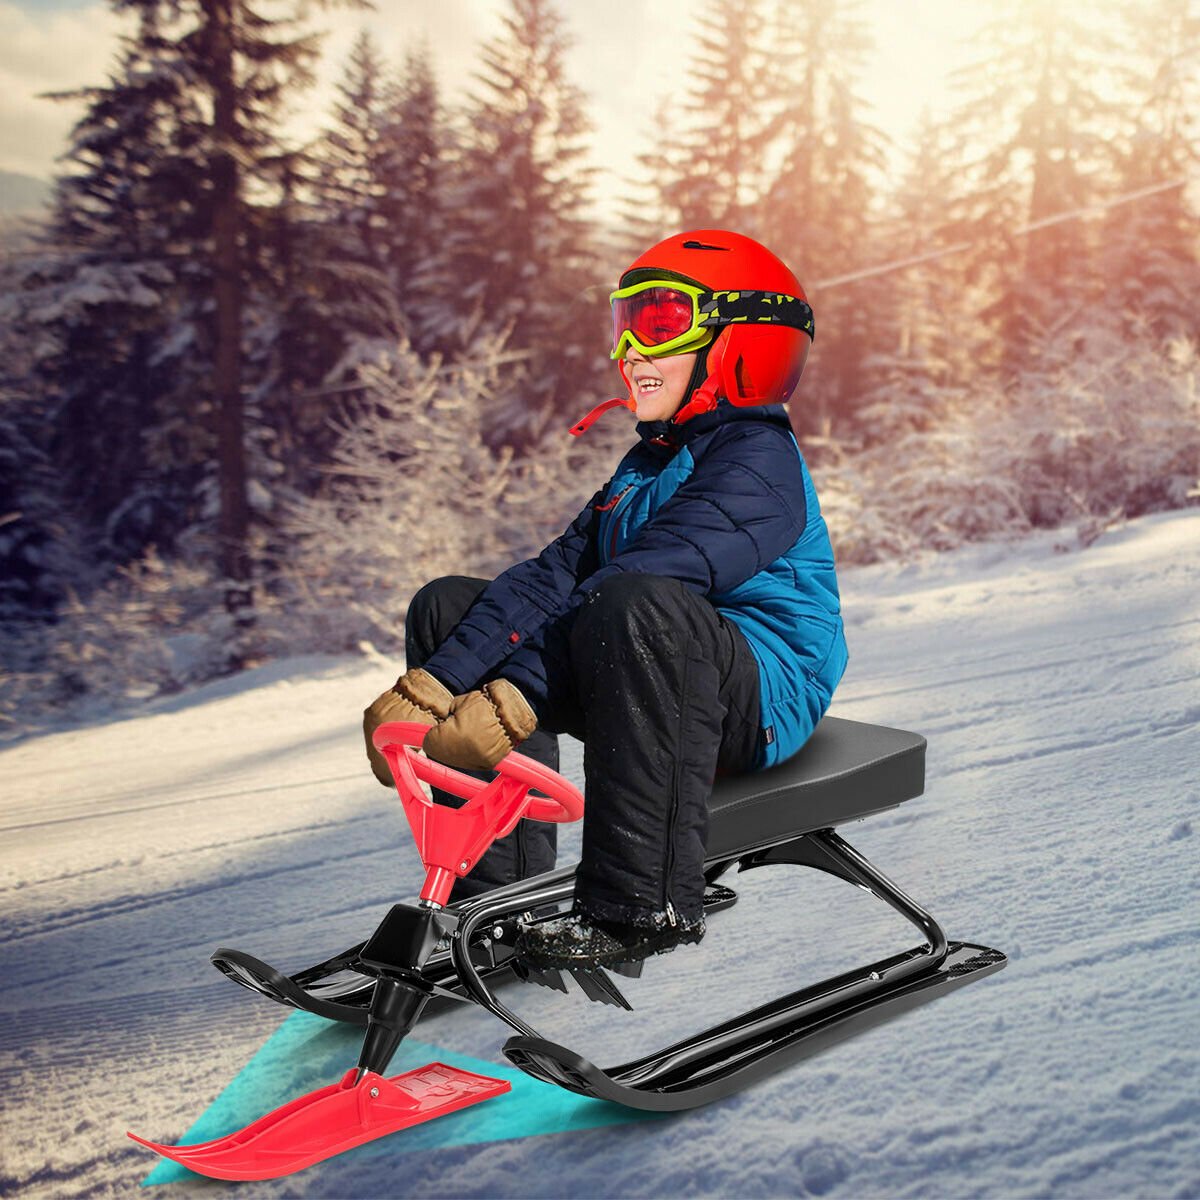 Kids Snow Sand Grass Sled w/ Steering Wheel and Brakes, Red at Gallery Canada